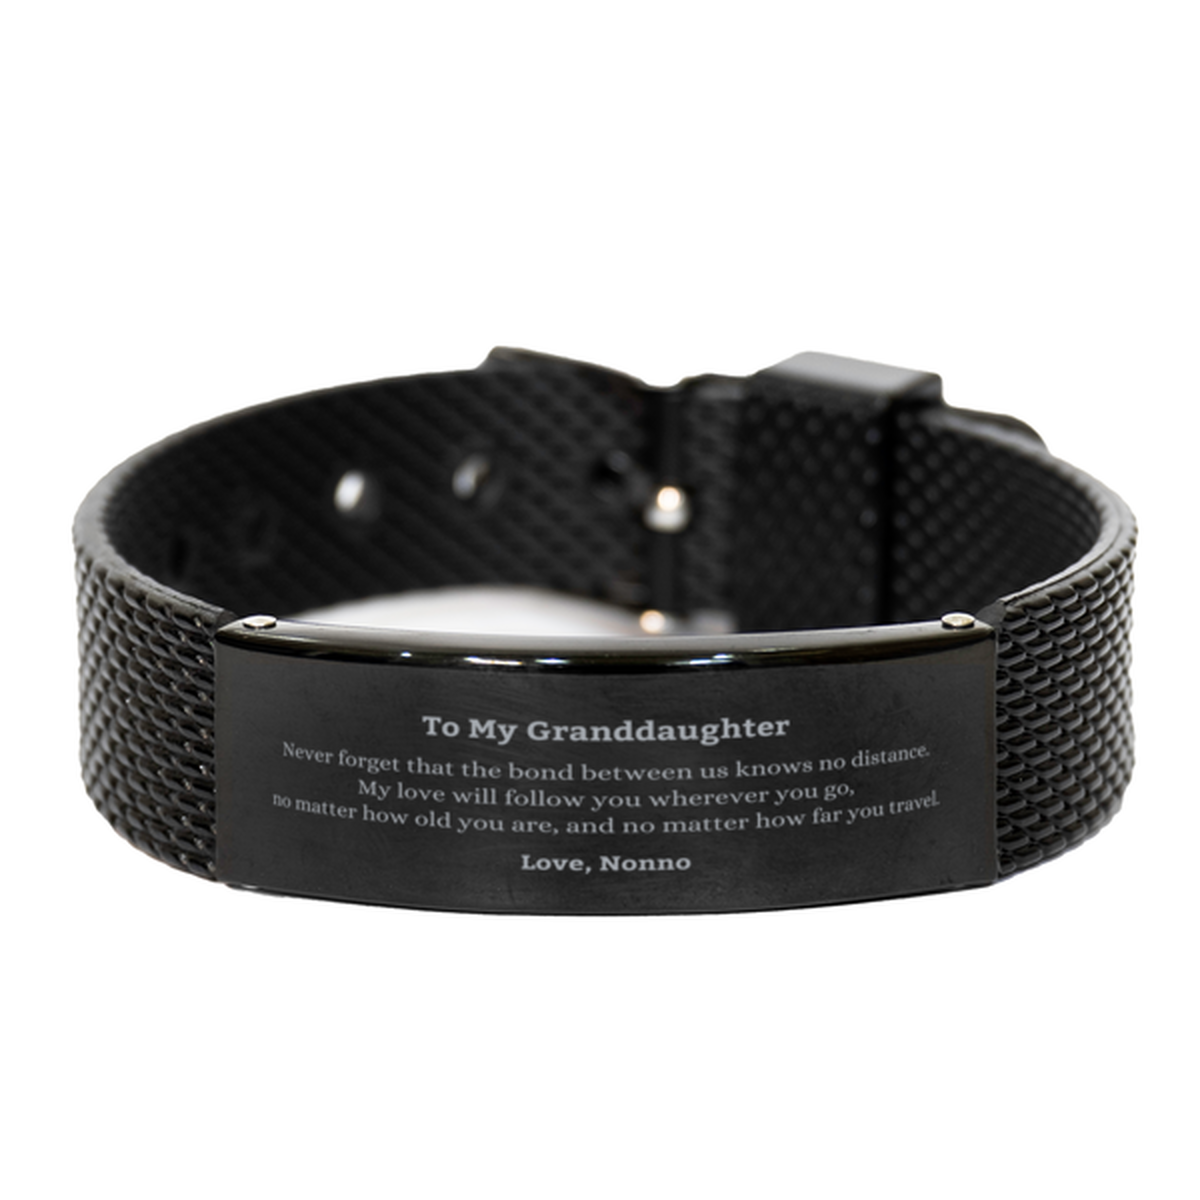 Granddaughter Birthday Gifts from Nonno, Adjustable Black Shark Mesh Bracelet for Granddaughter Christmas Graduation Unique Gifts Granddaughter Never forget that the bond between us knows no distance. Love, Nonno